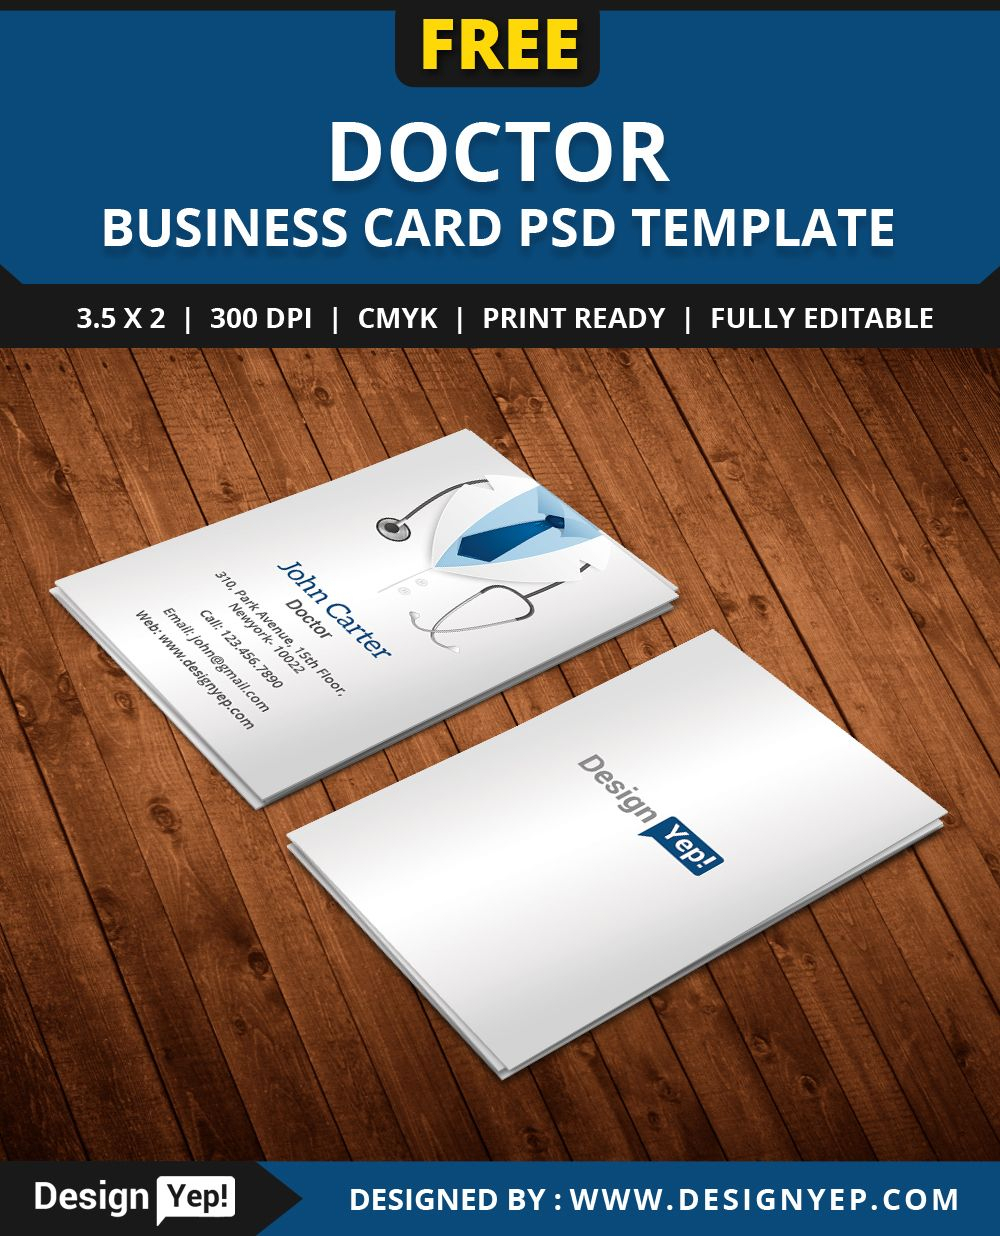 Free Doctor Business Card Template Psd | Free Business Card With Medical Business Cards Templates Free